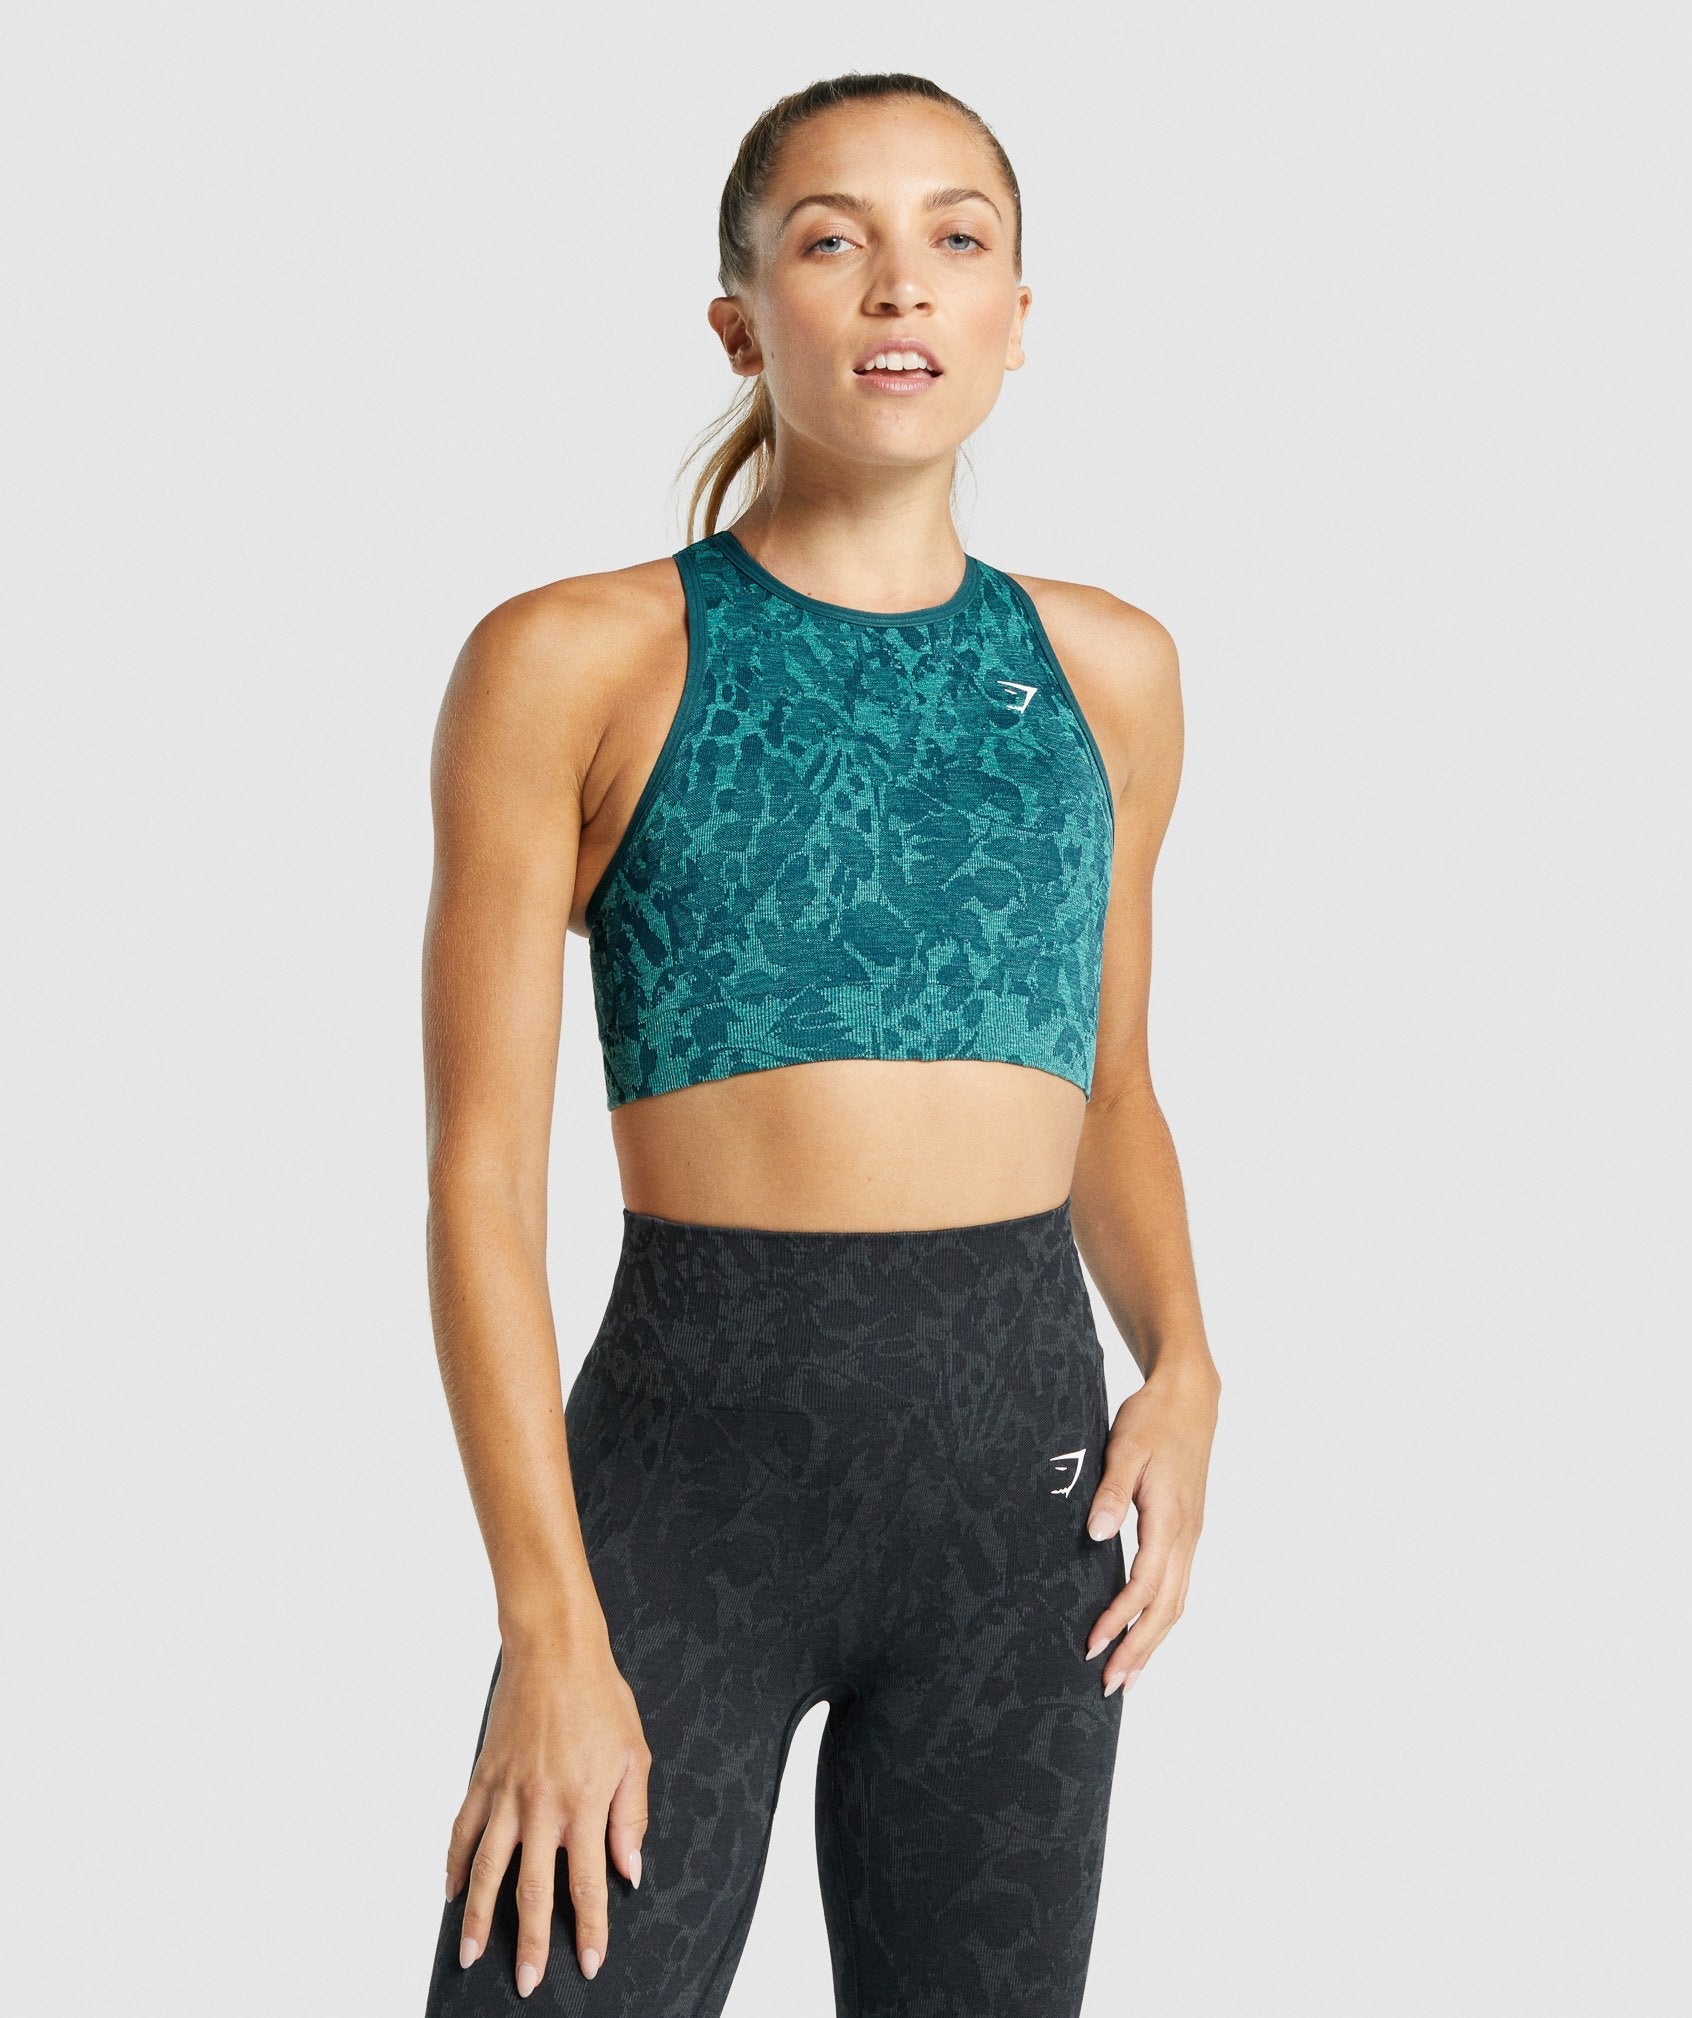 Adapt Animal Seamless Sports Bra in Butterfly | Teal - view 1